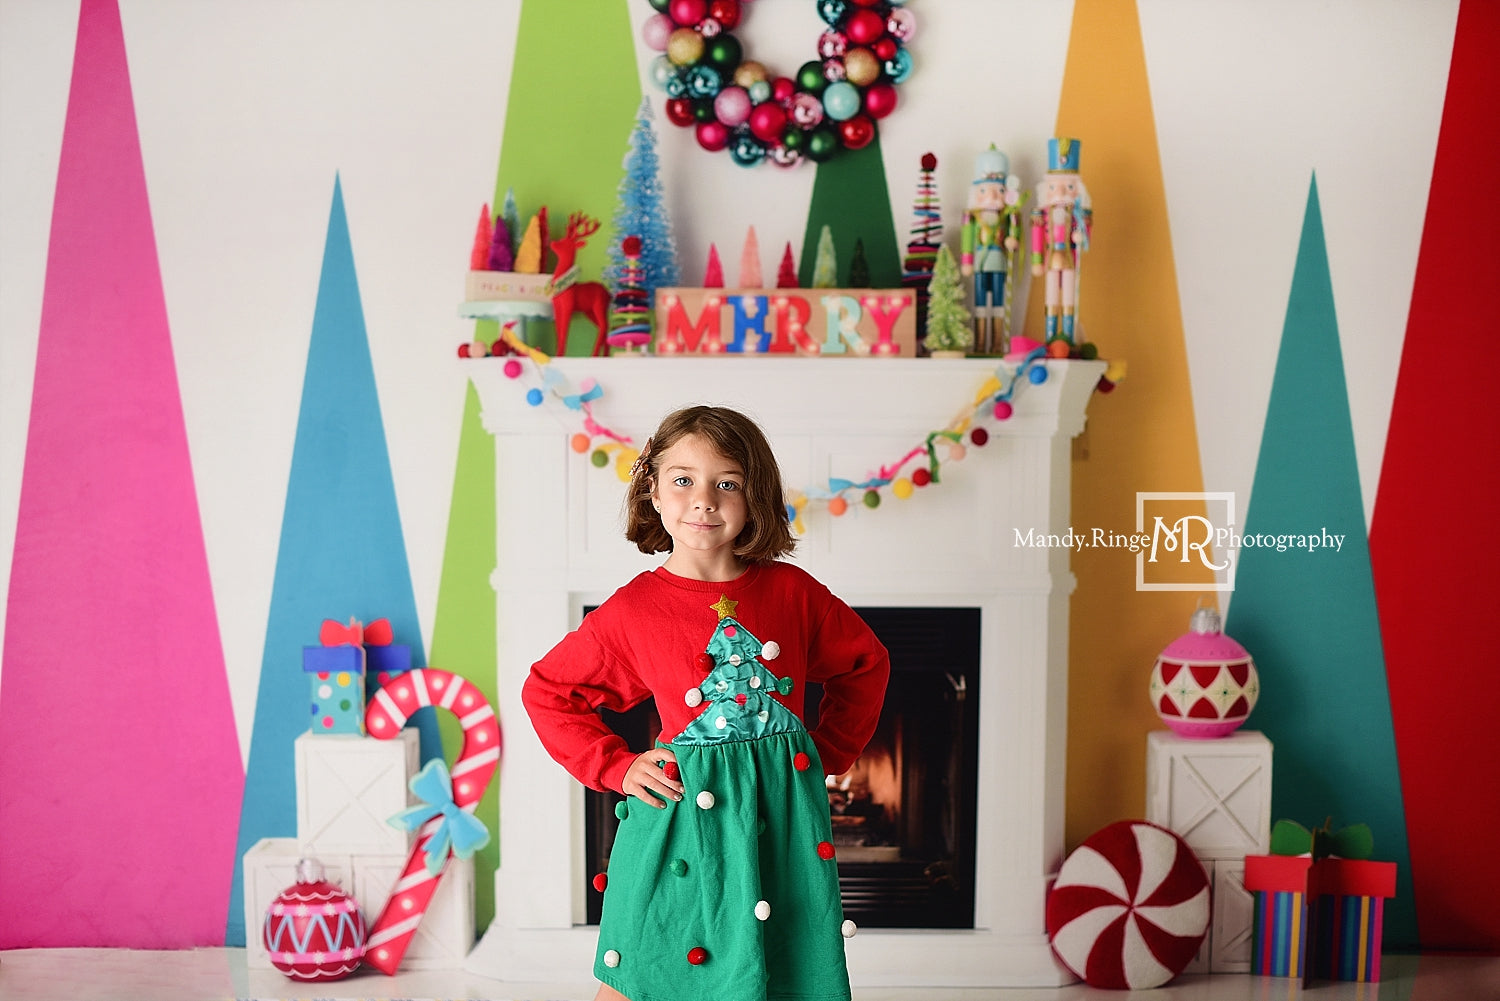 Kate Merry Bright Christmas Fireplace Backdrop Designed by Mandy Ringe Photography